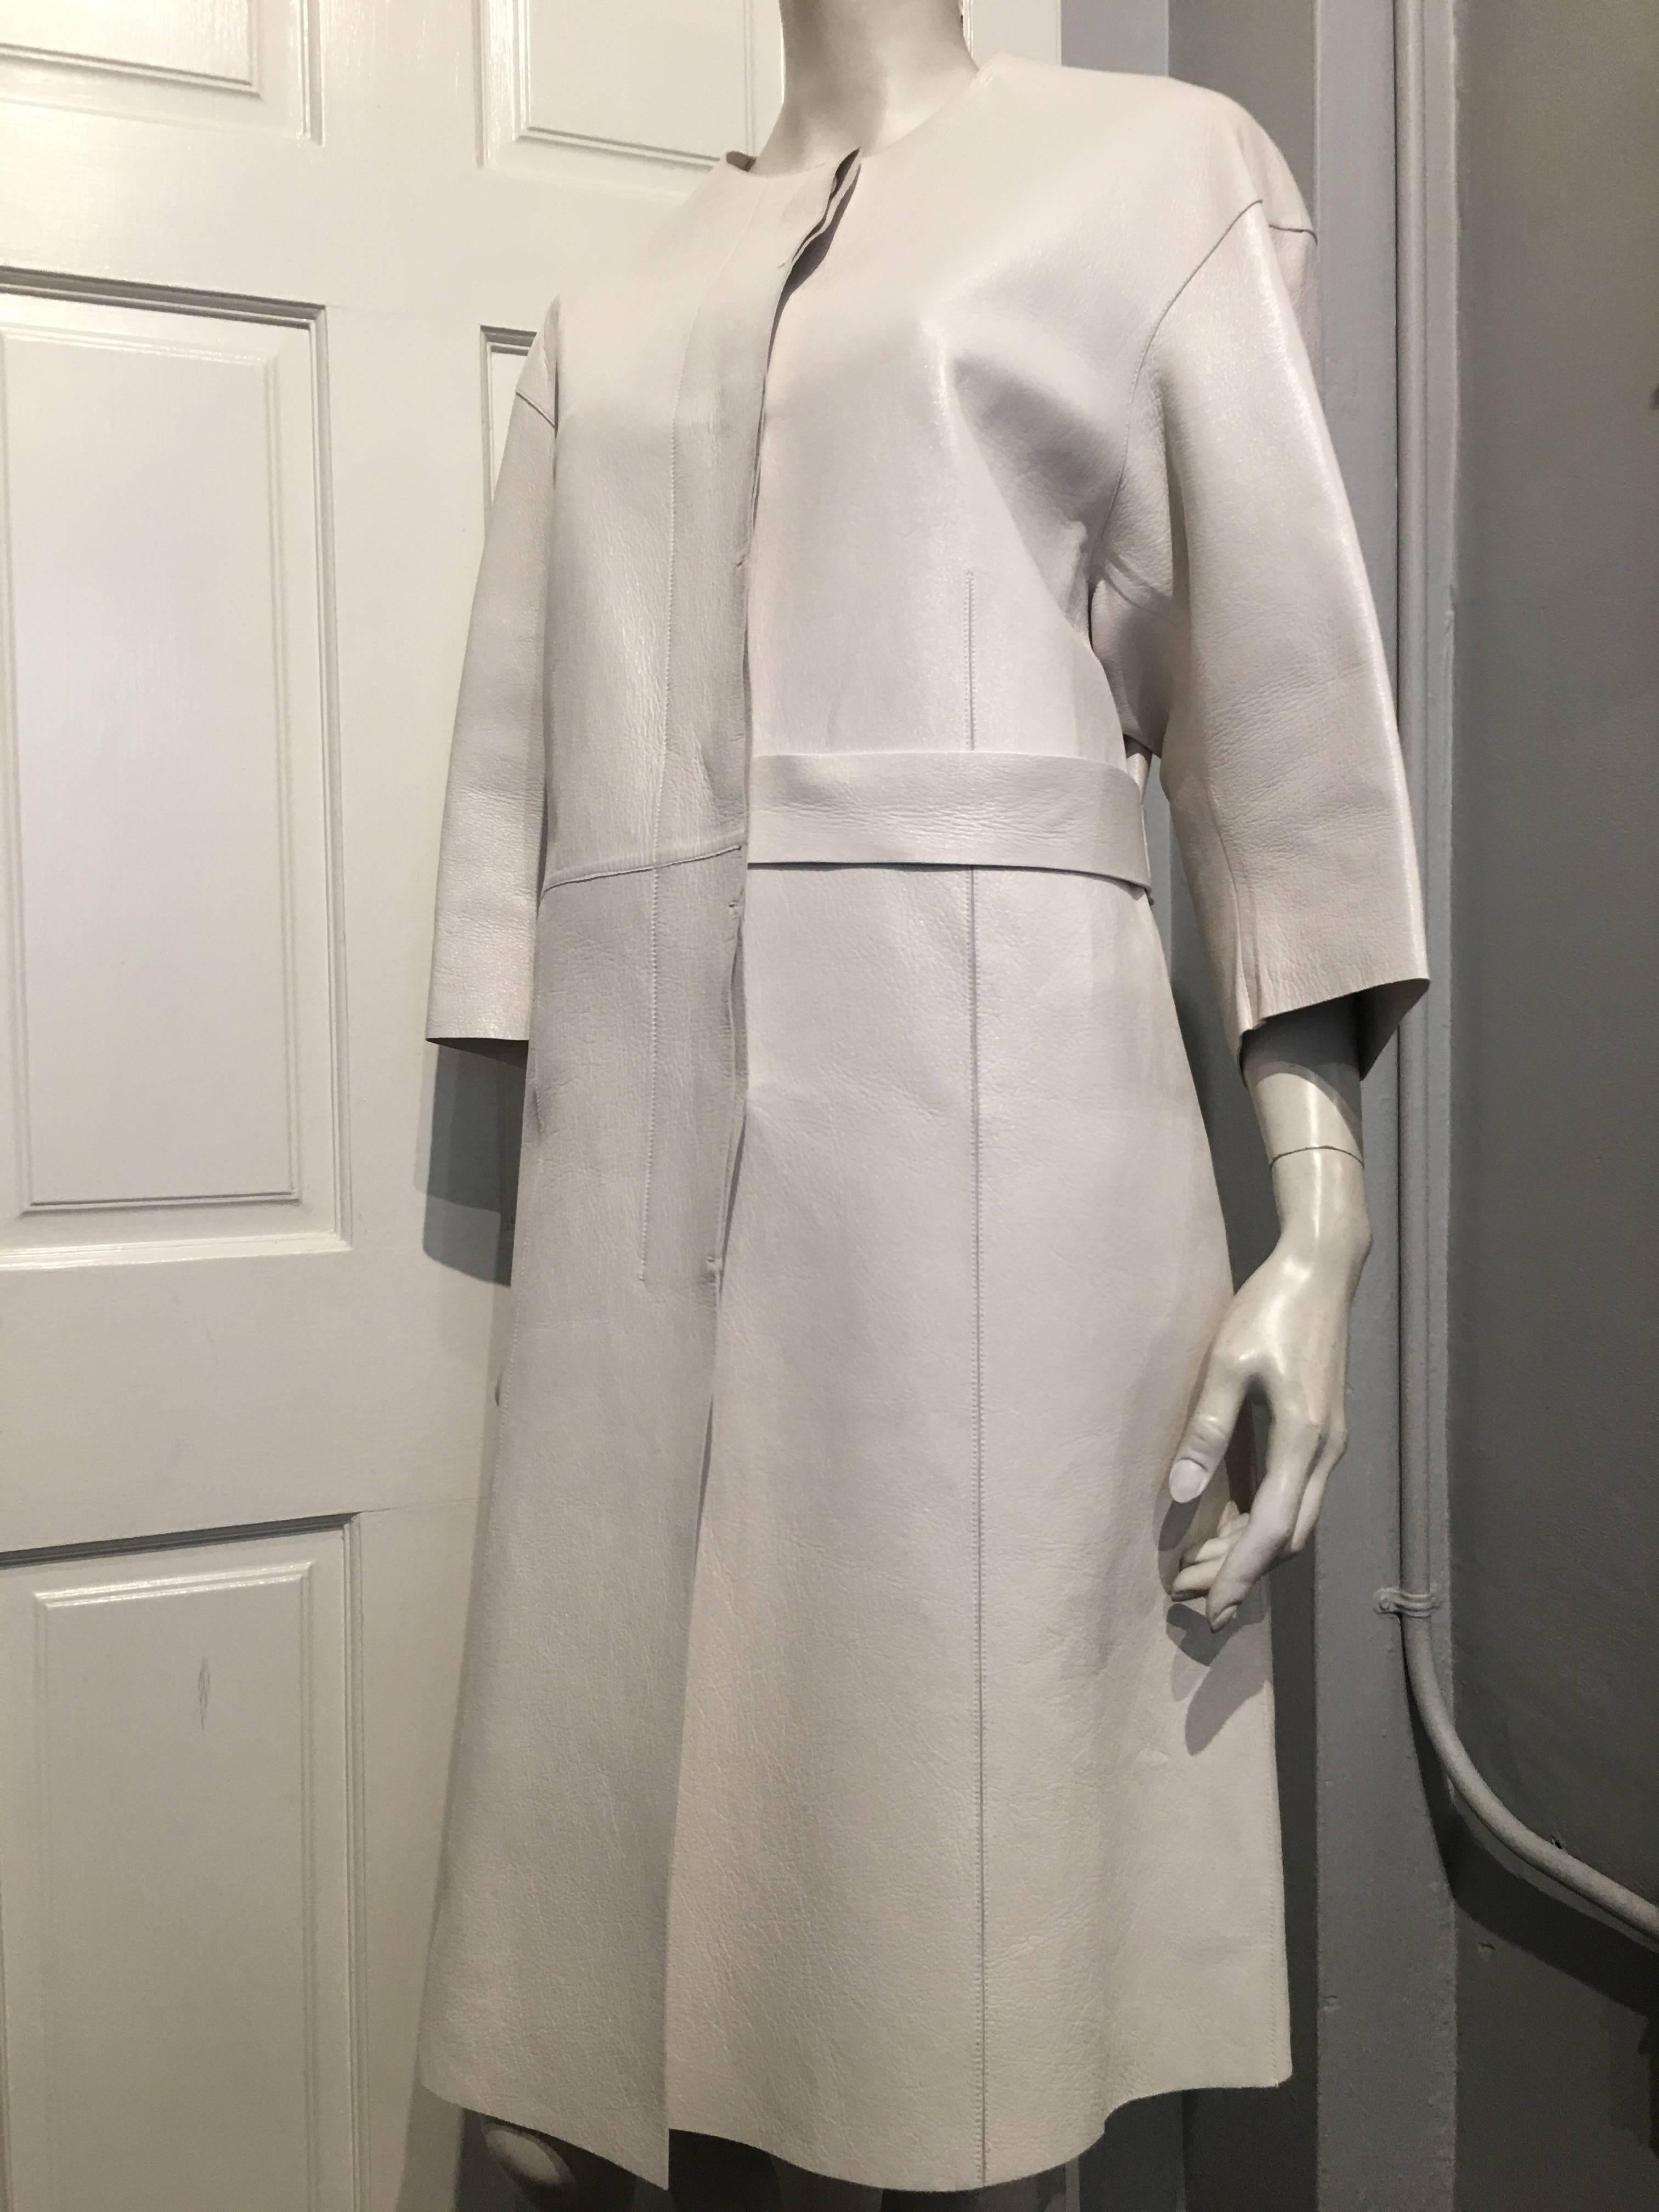 Marni white leather coat with matching leather buttons and belt. The sleeves are 15 inches long. 